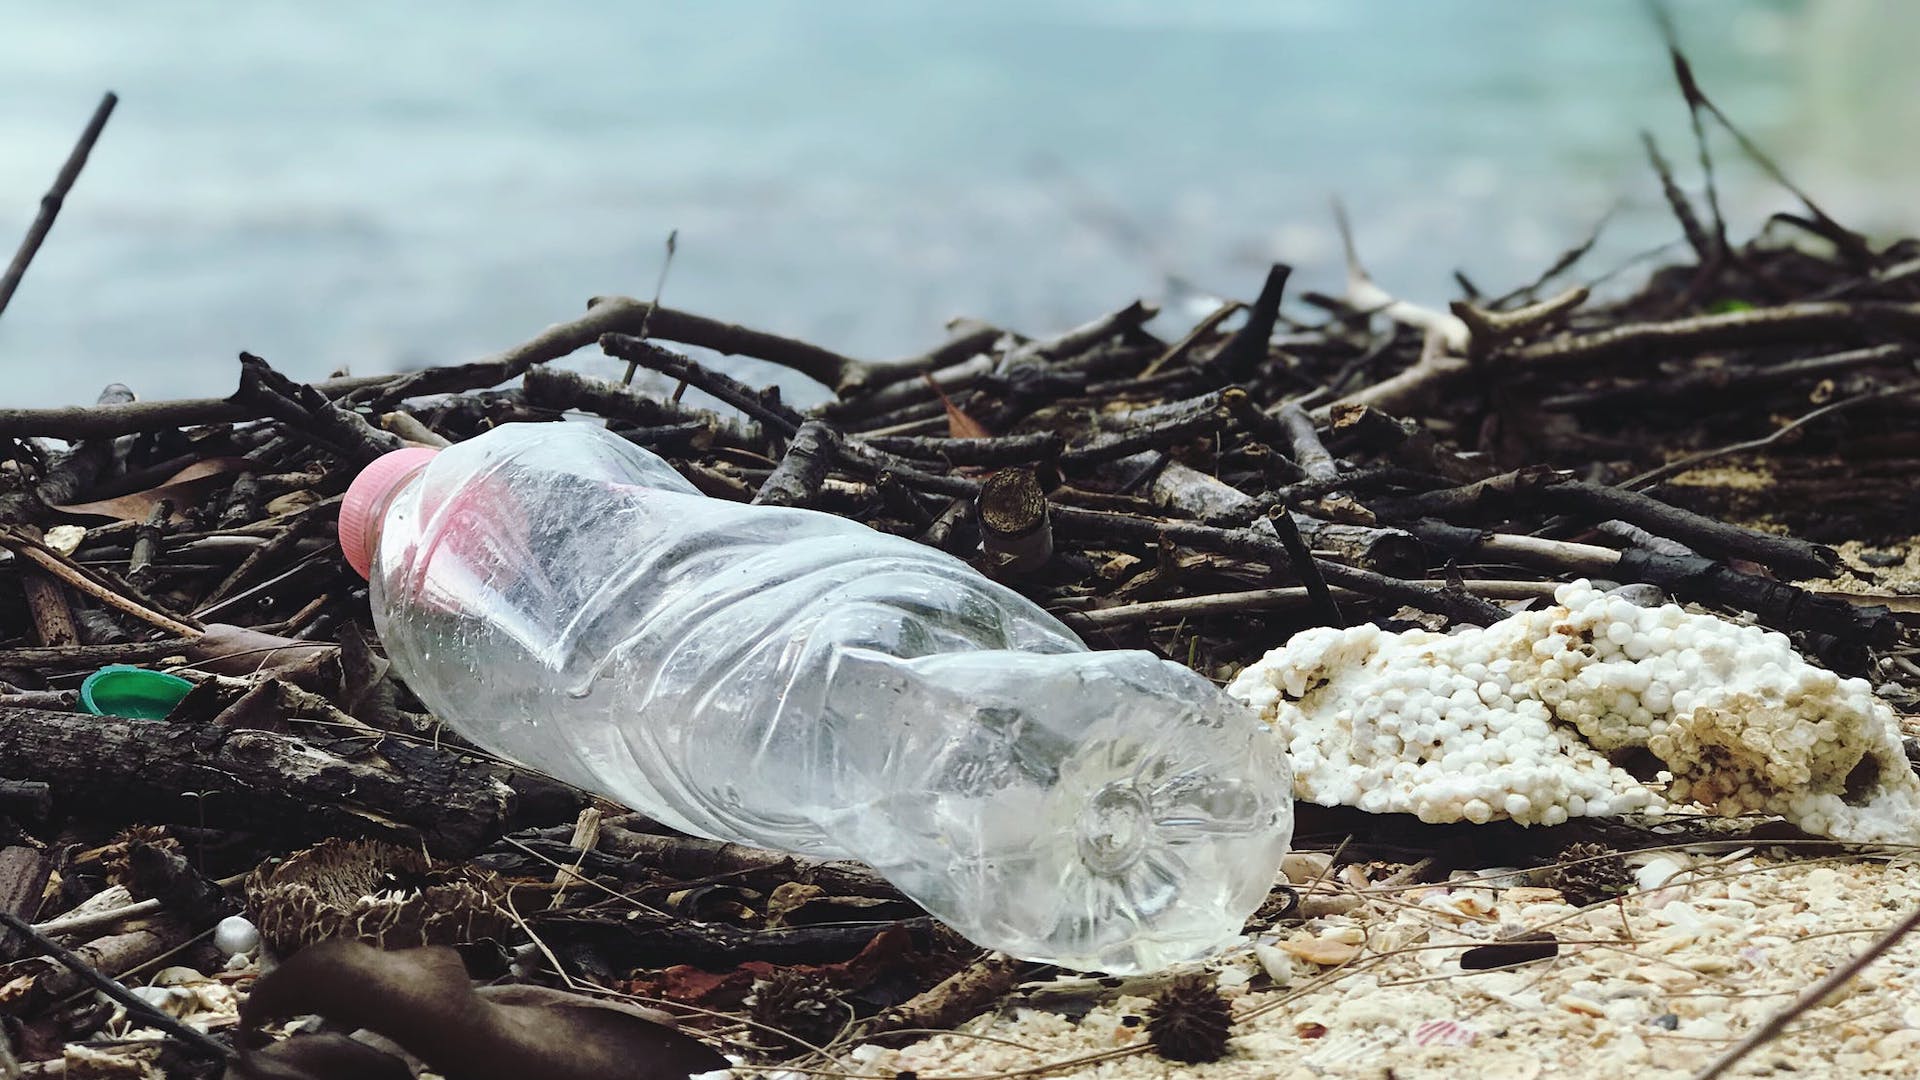 More than half of Brits think plastic pollution has grown during the Covid-19 crisis